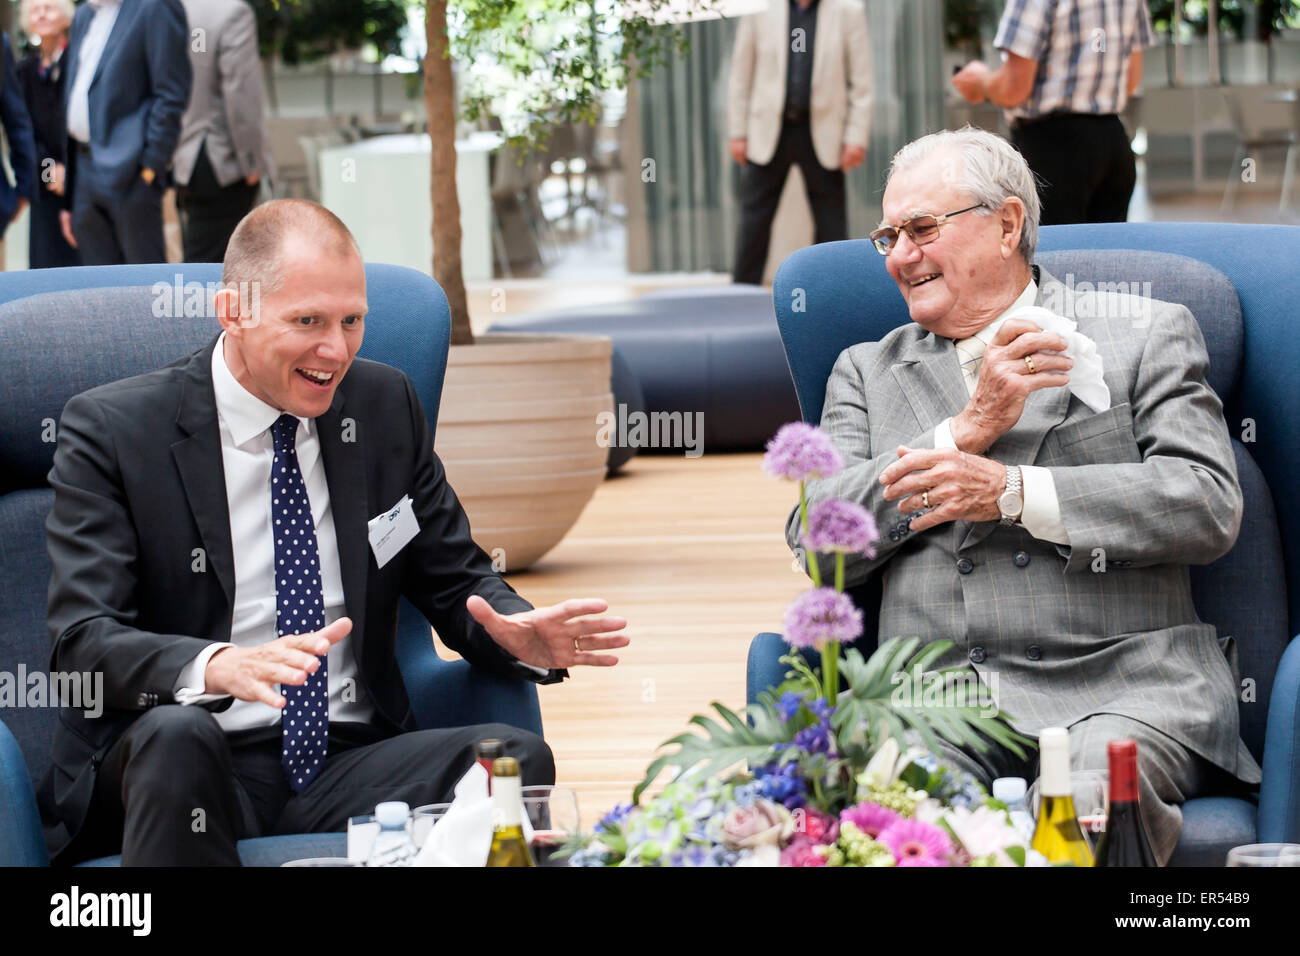 Hedehusene, Denmark, May 27th, 2015: Prince Concort Henrik (R) and DSV’s CEO, Mr. Jens Bjorn Andersen talks at the reception hall at DSv’s head quarter in Hedehusene. The Prince Concort has just unveiled his new sculpture, “The Creative Hand” in front of DSV’s entrance Credit:  OJPHOTOS/Alamy Live News Stock Photo